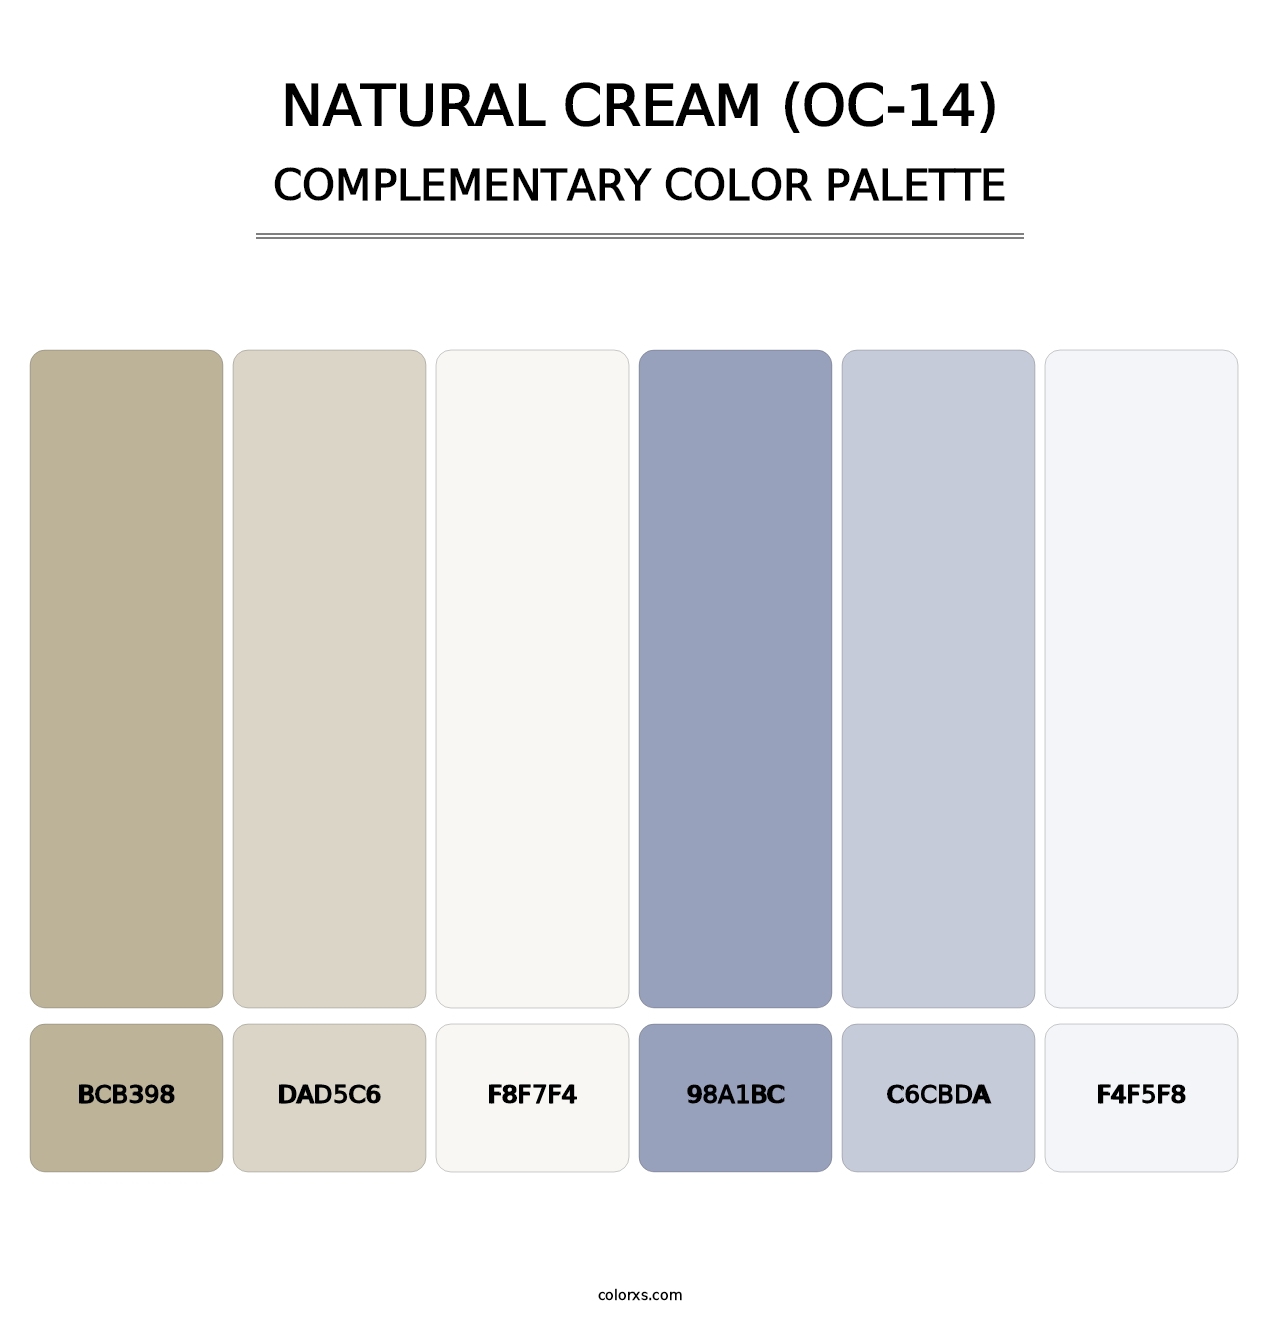 Natural Cream (OC-14) - Complementary Color Palette